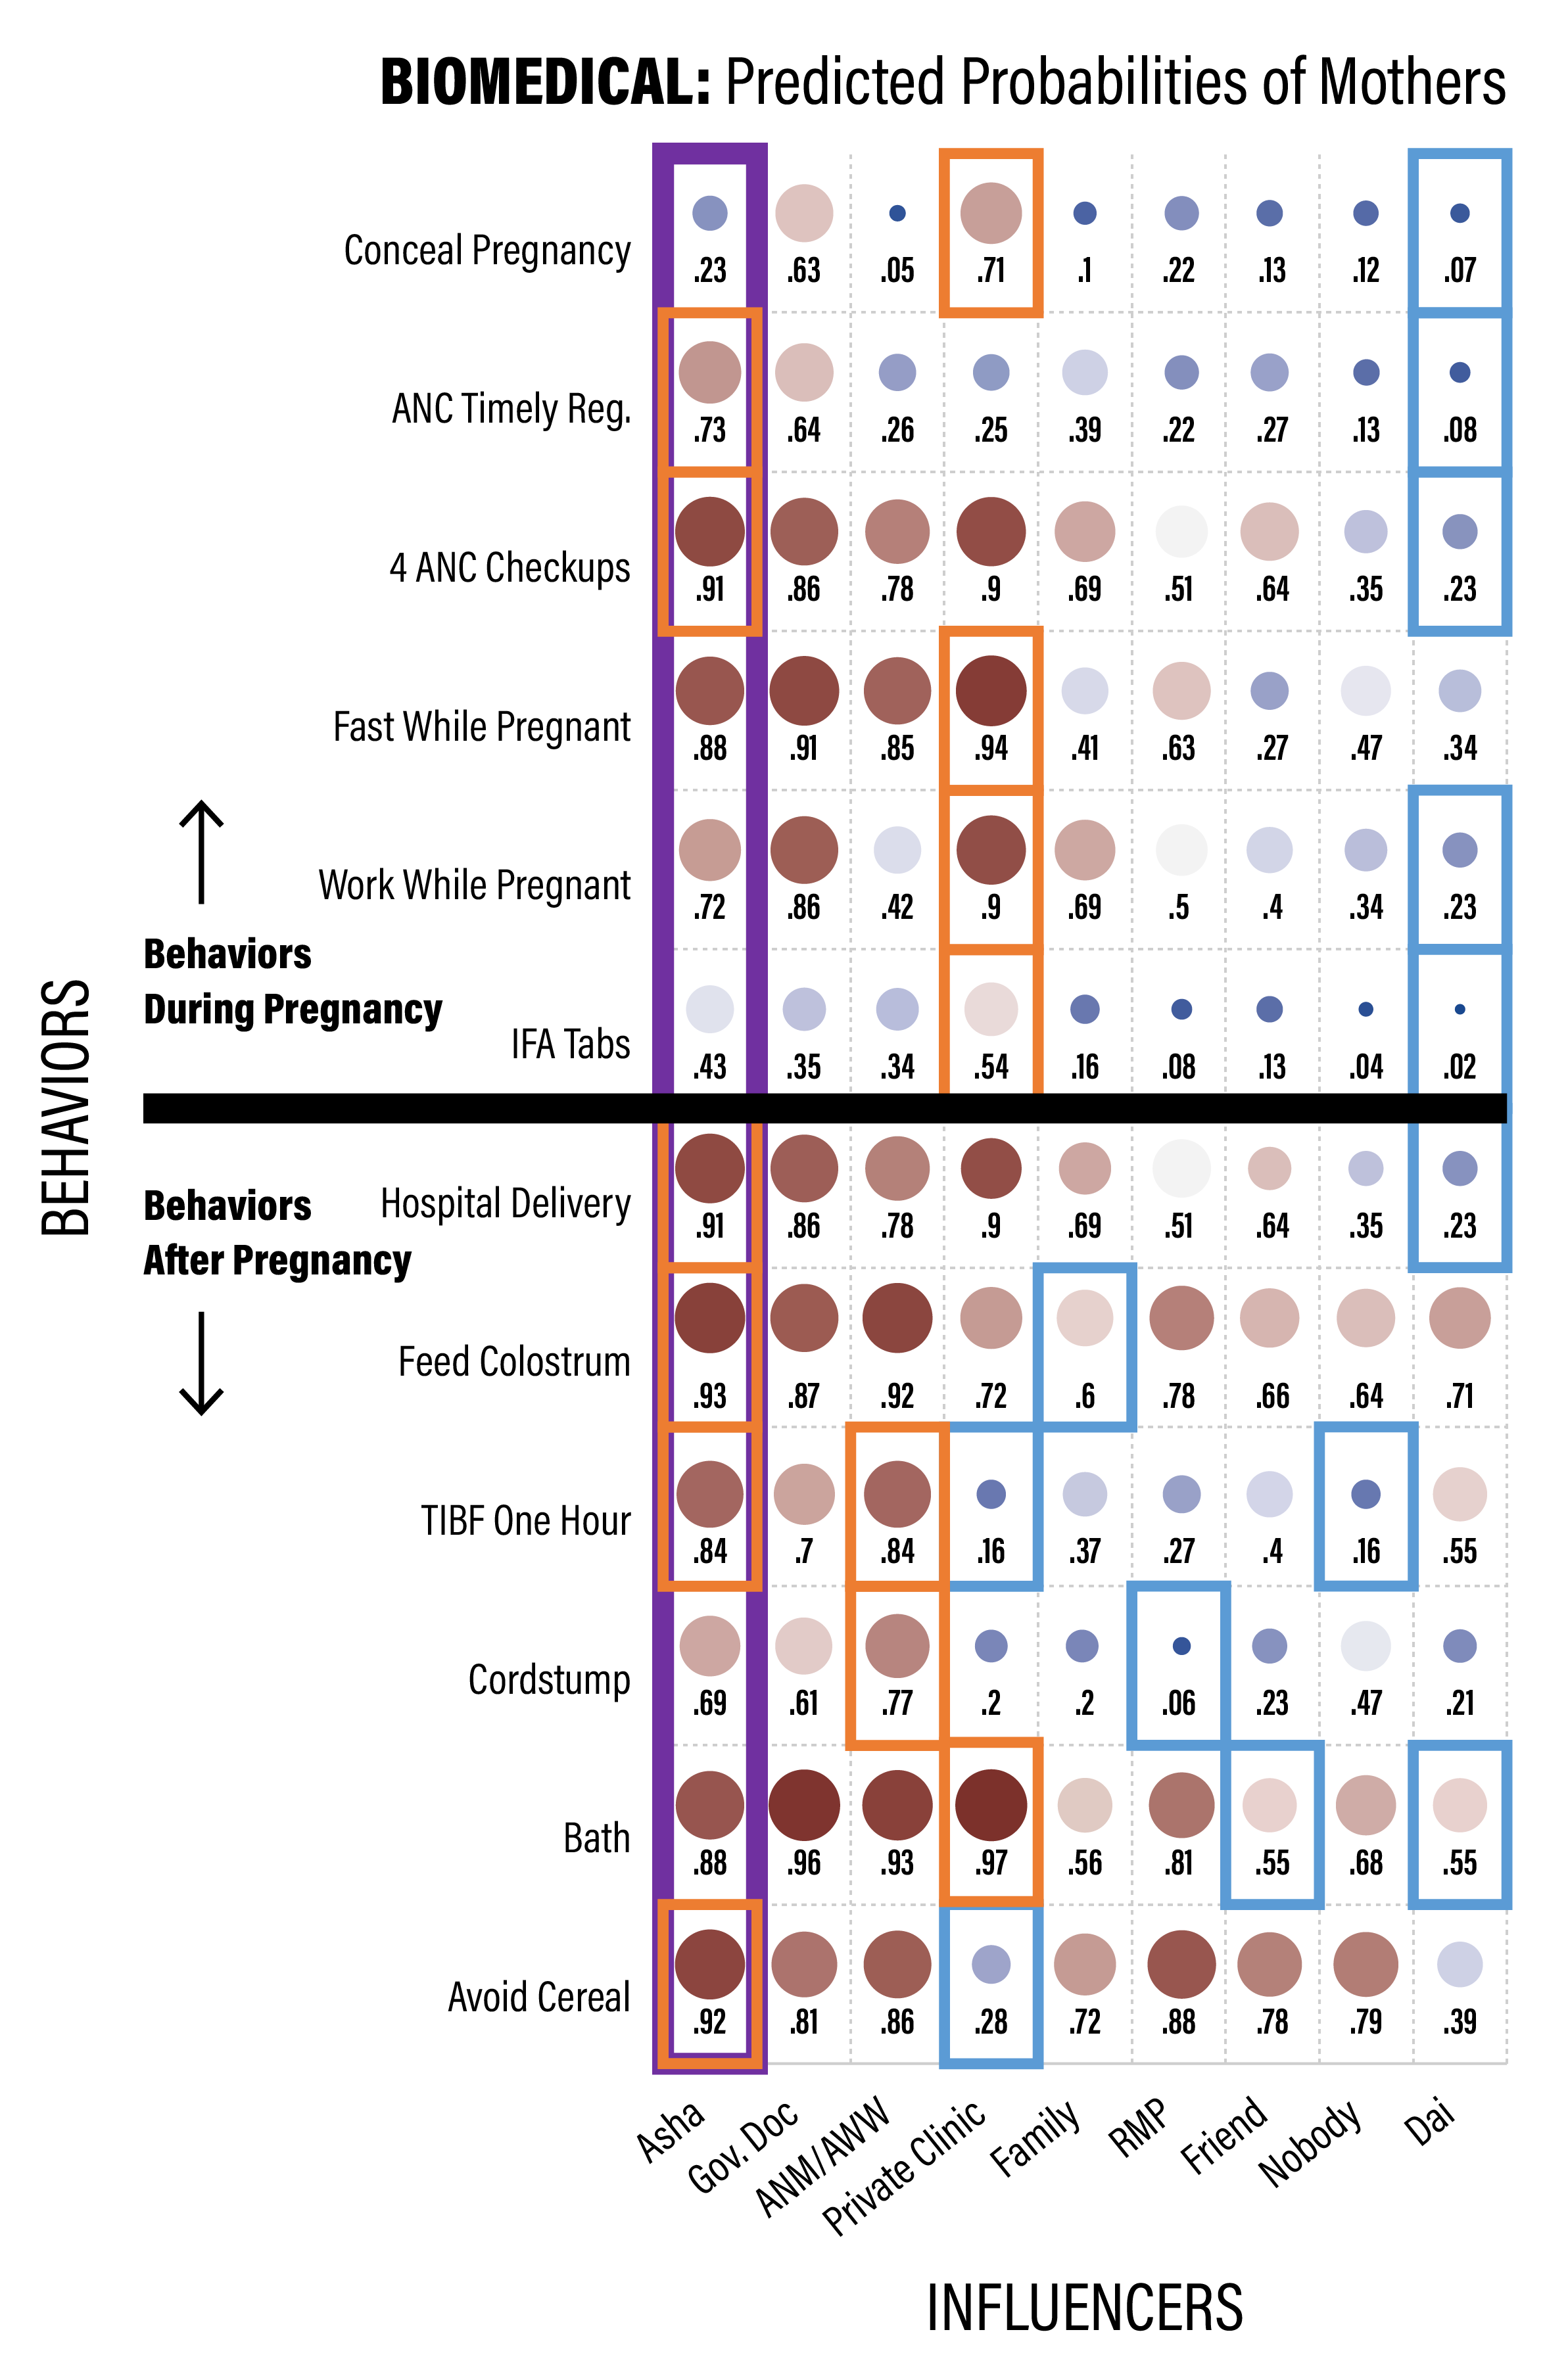 ASHA positioning as an influencer of biomedical behaviors for recent mothers. The red squares toward the left are around the largest value for each row, indicating the strongest positive influencer for that behavior, and the blue squares are for the lowest value for each row, indicating the lowest influencer for that behavior.